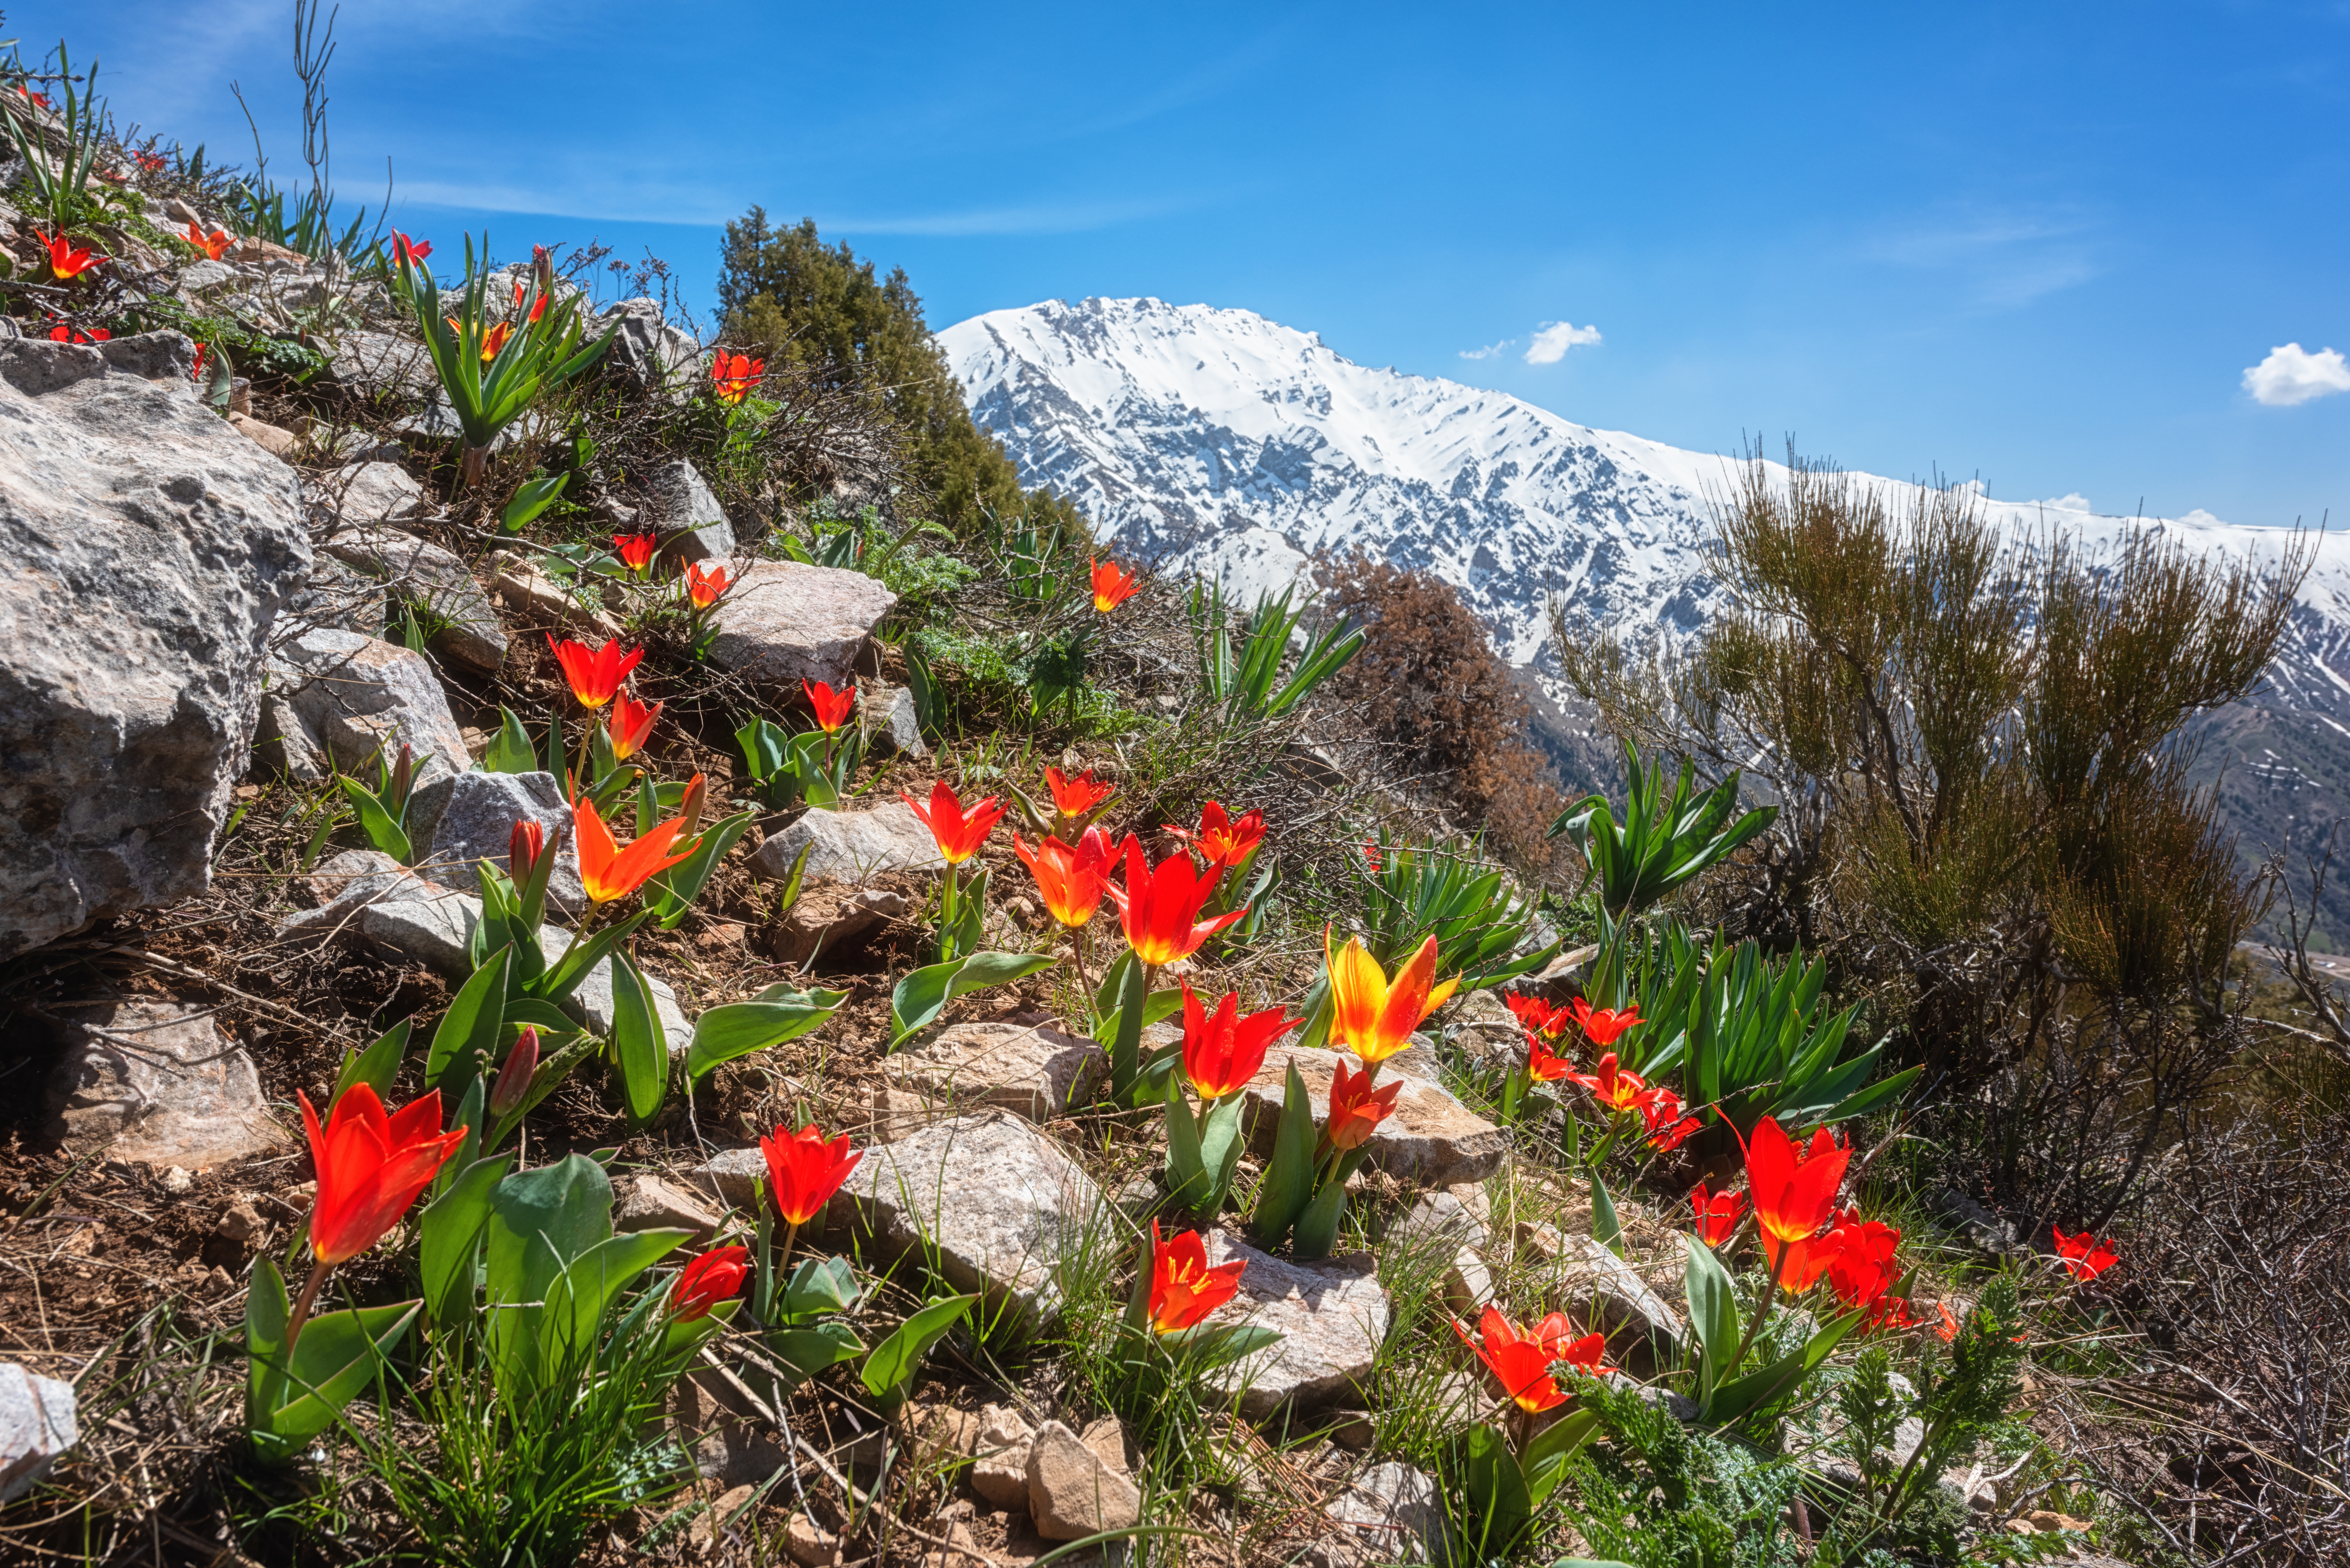 Blossom of wild growing beautiful red tulip flowers in Chimgan mountains in spring with snowy peak of Greater Chimgan and blue sky in the background – © Uhryn Larysa / Shutterstock